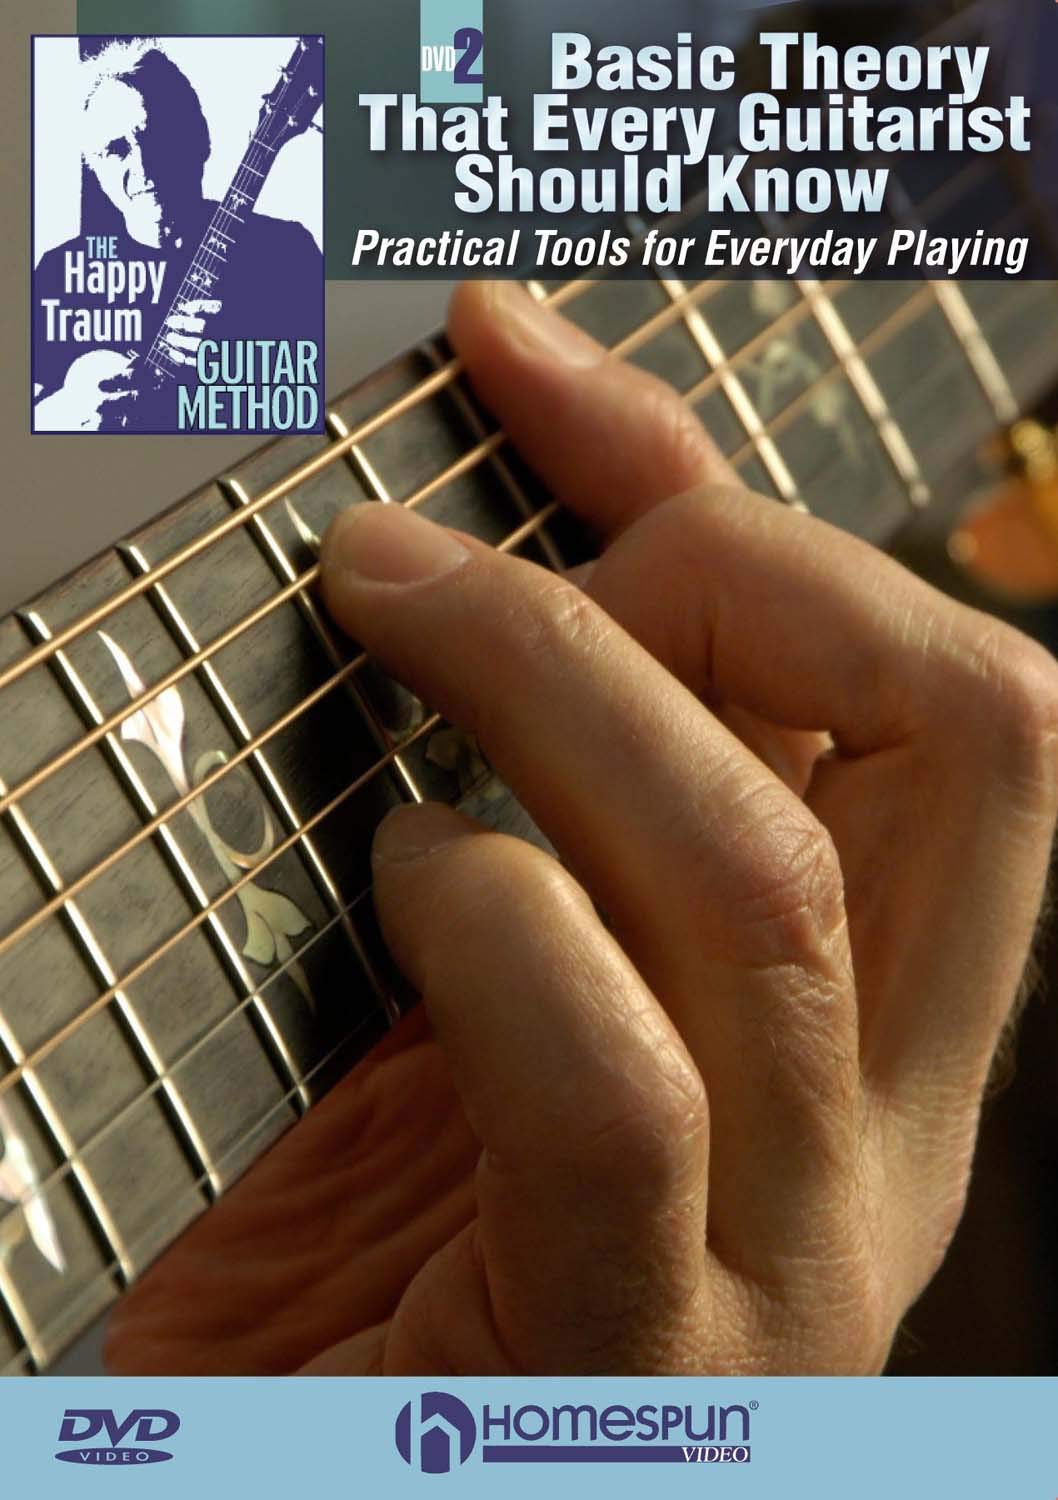 Basic theory that every guitarist should know 2